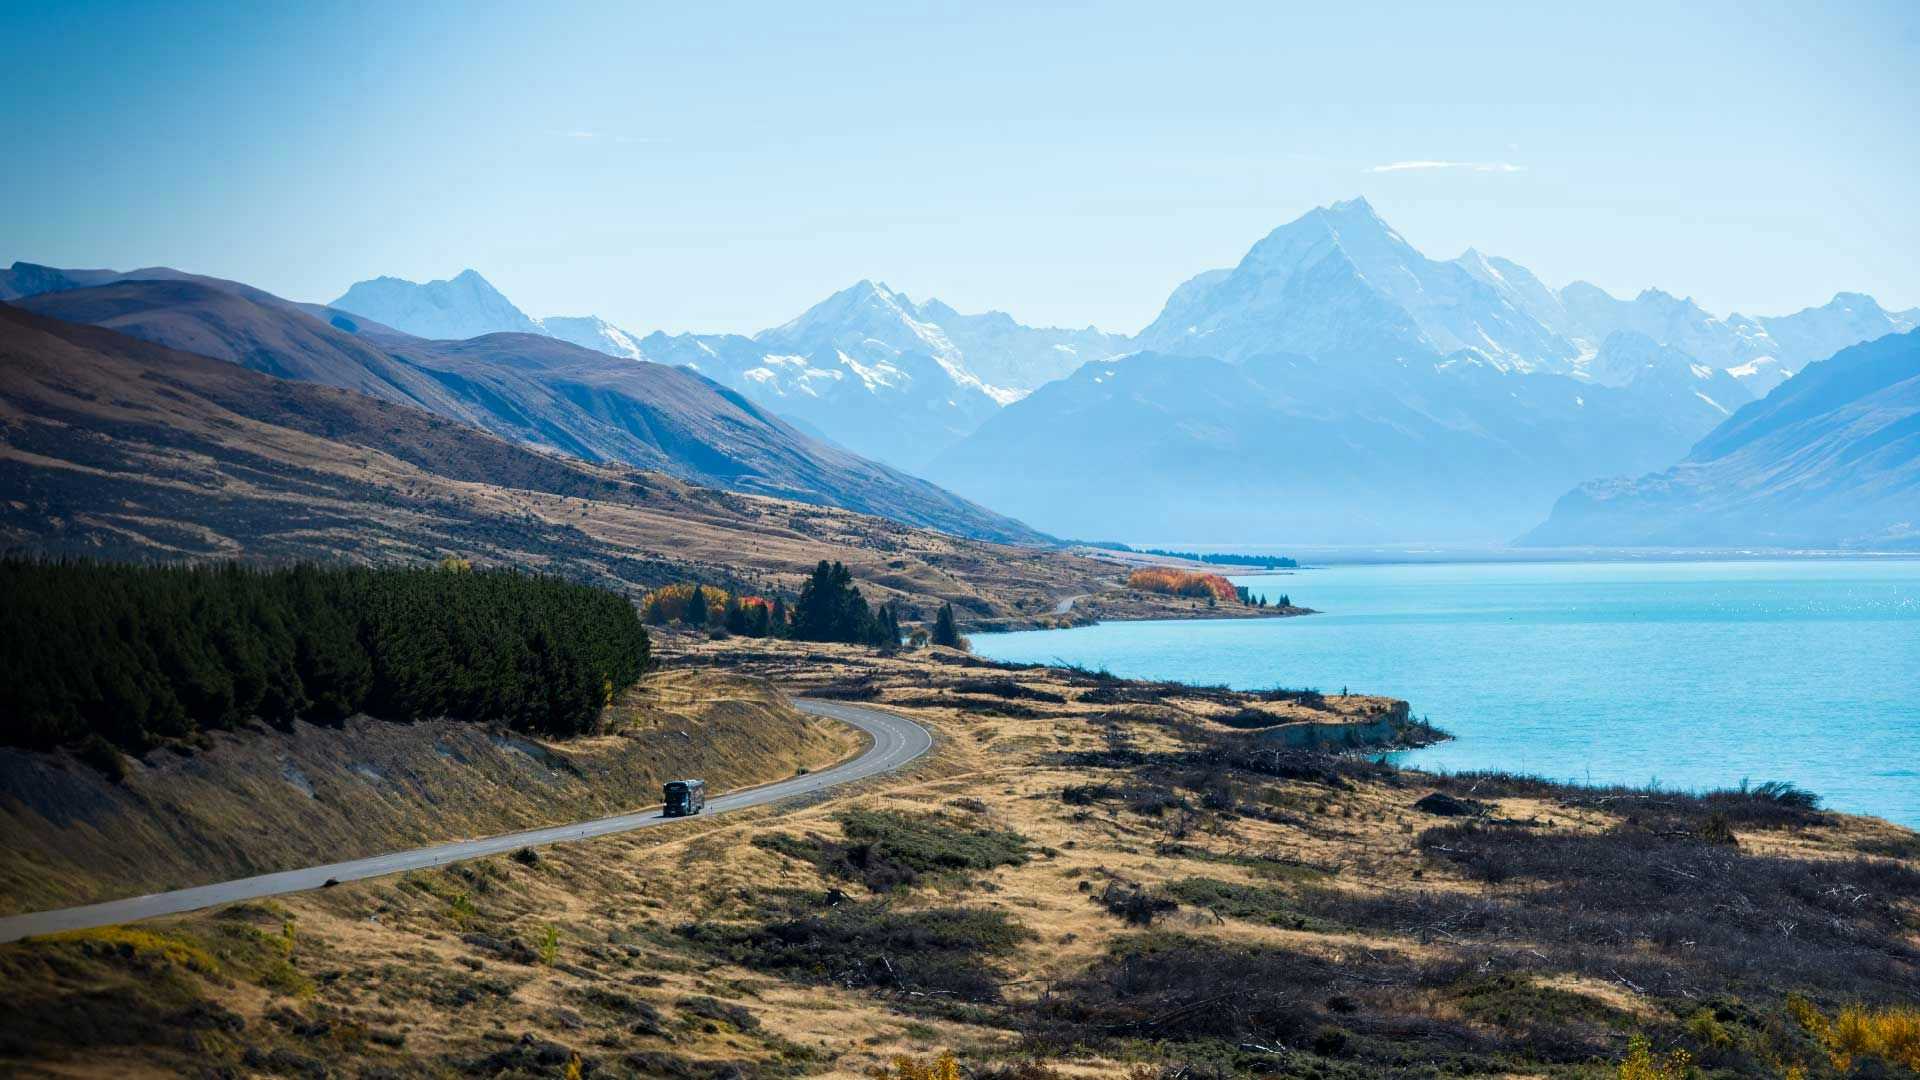 View over Lake Tekapo with Mount Cook in the background